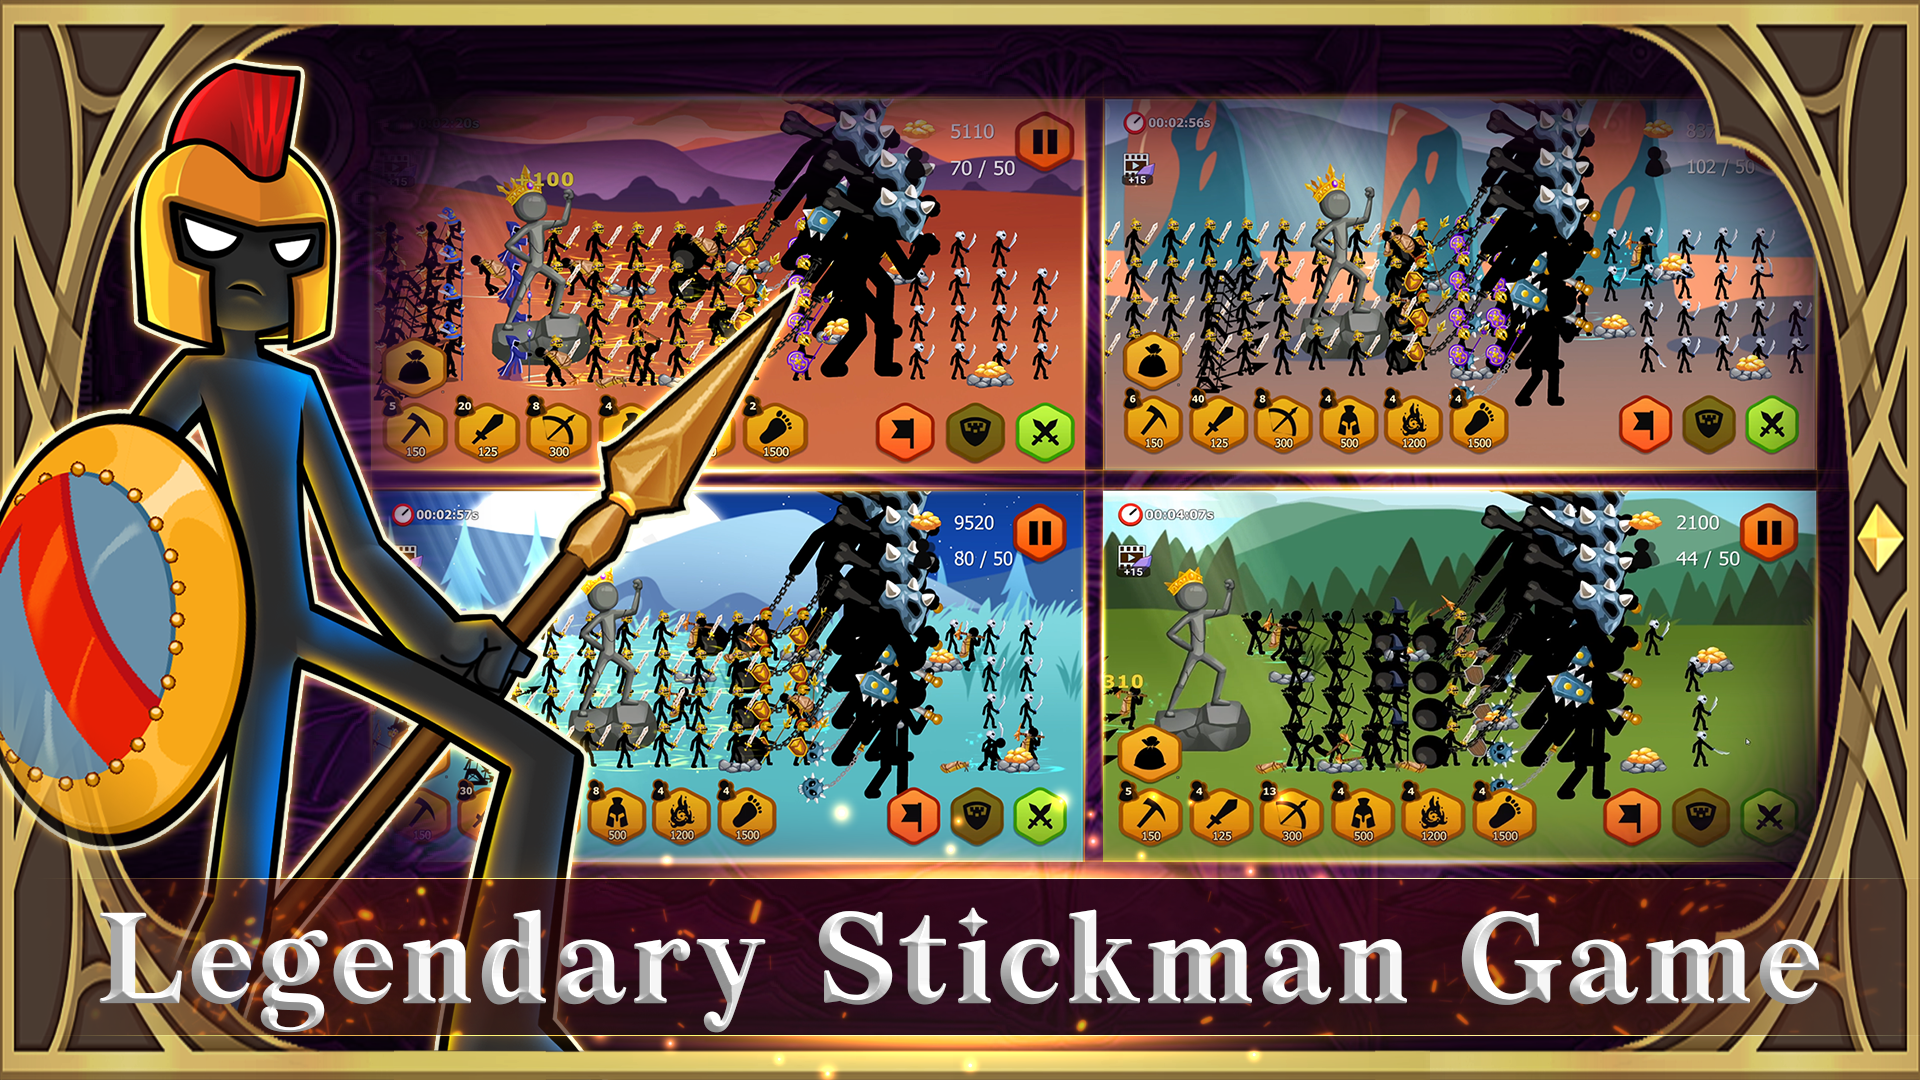 Stickman Fighter Epic Battle 2 Free In-App Purchases MOD APK